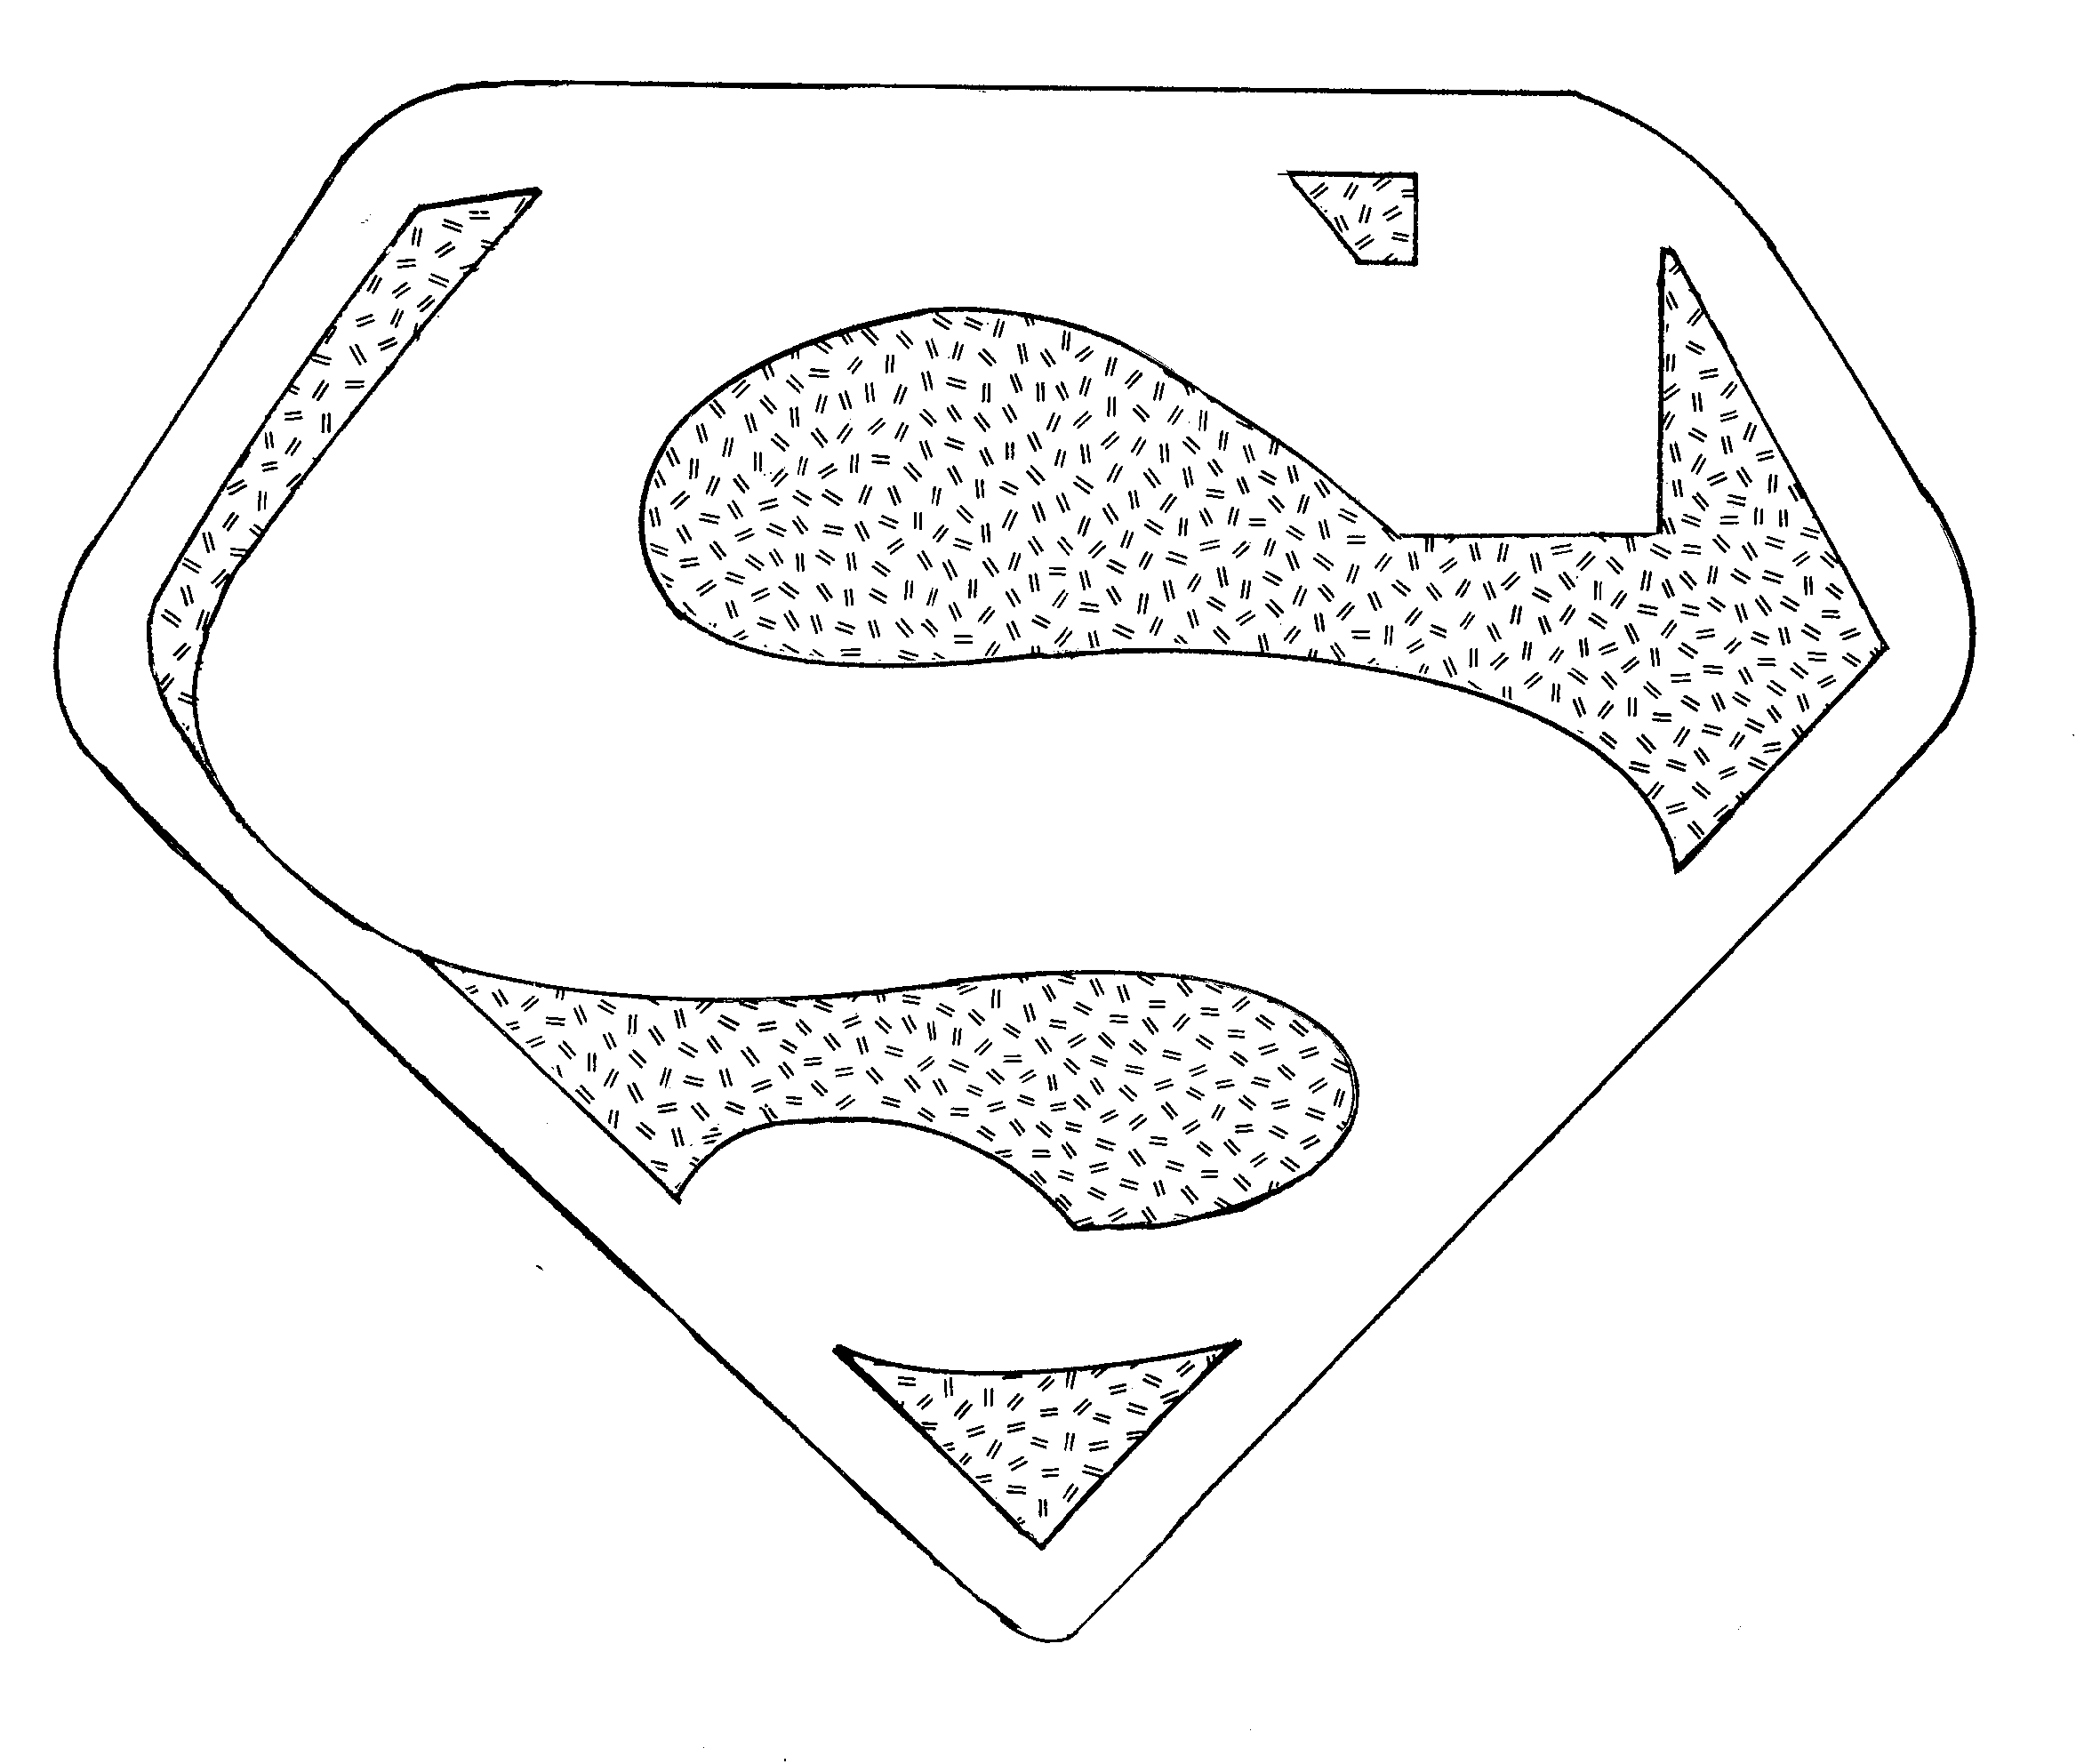 Superman logo coloring pages to download and print for free